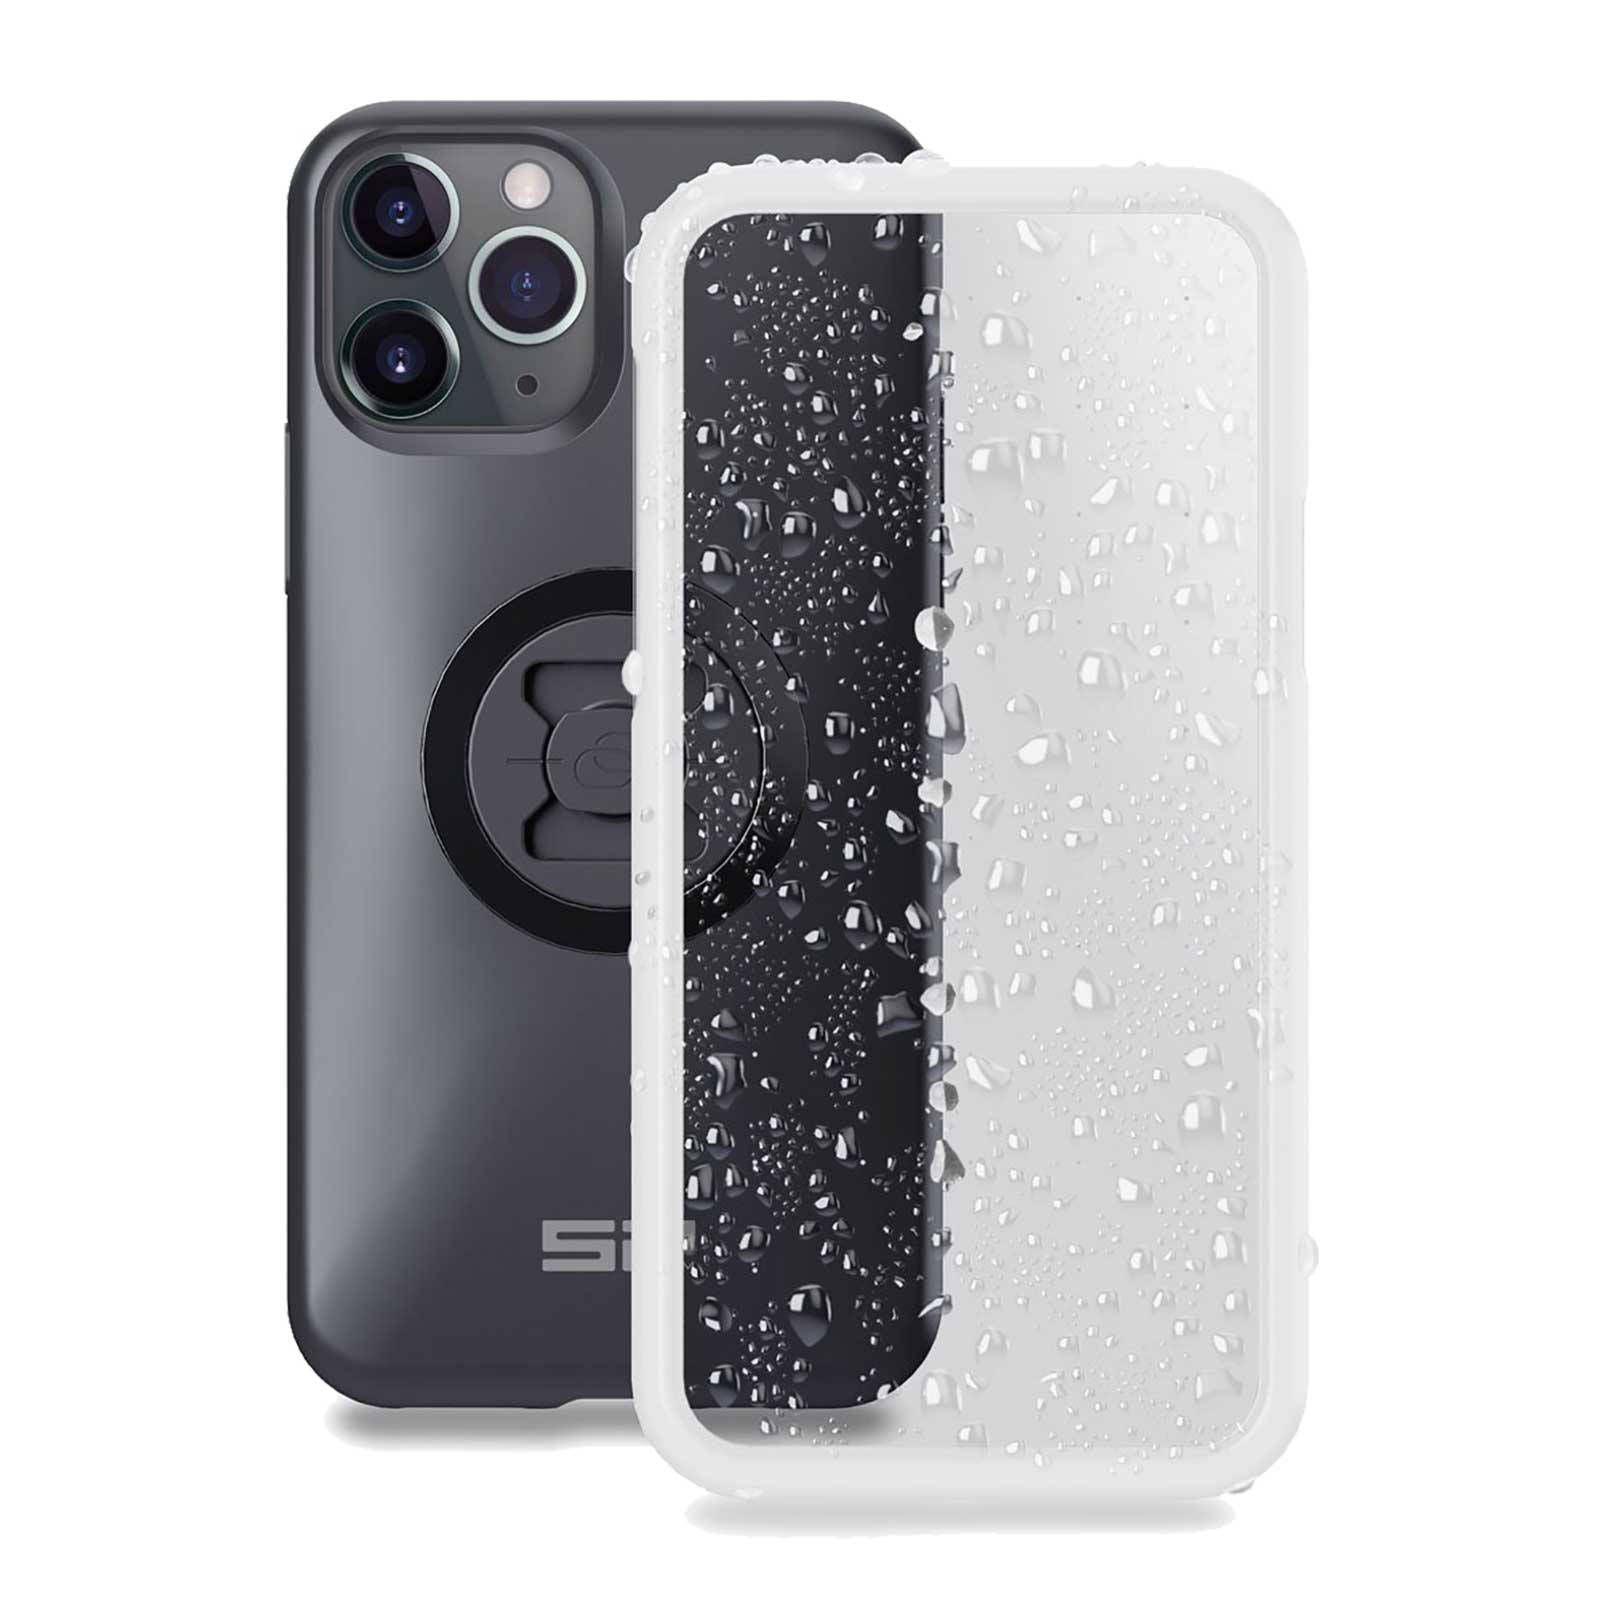 New SP CONNECT WEATHER COVER APPLE IPHONE 11 PRO SPC53222